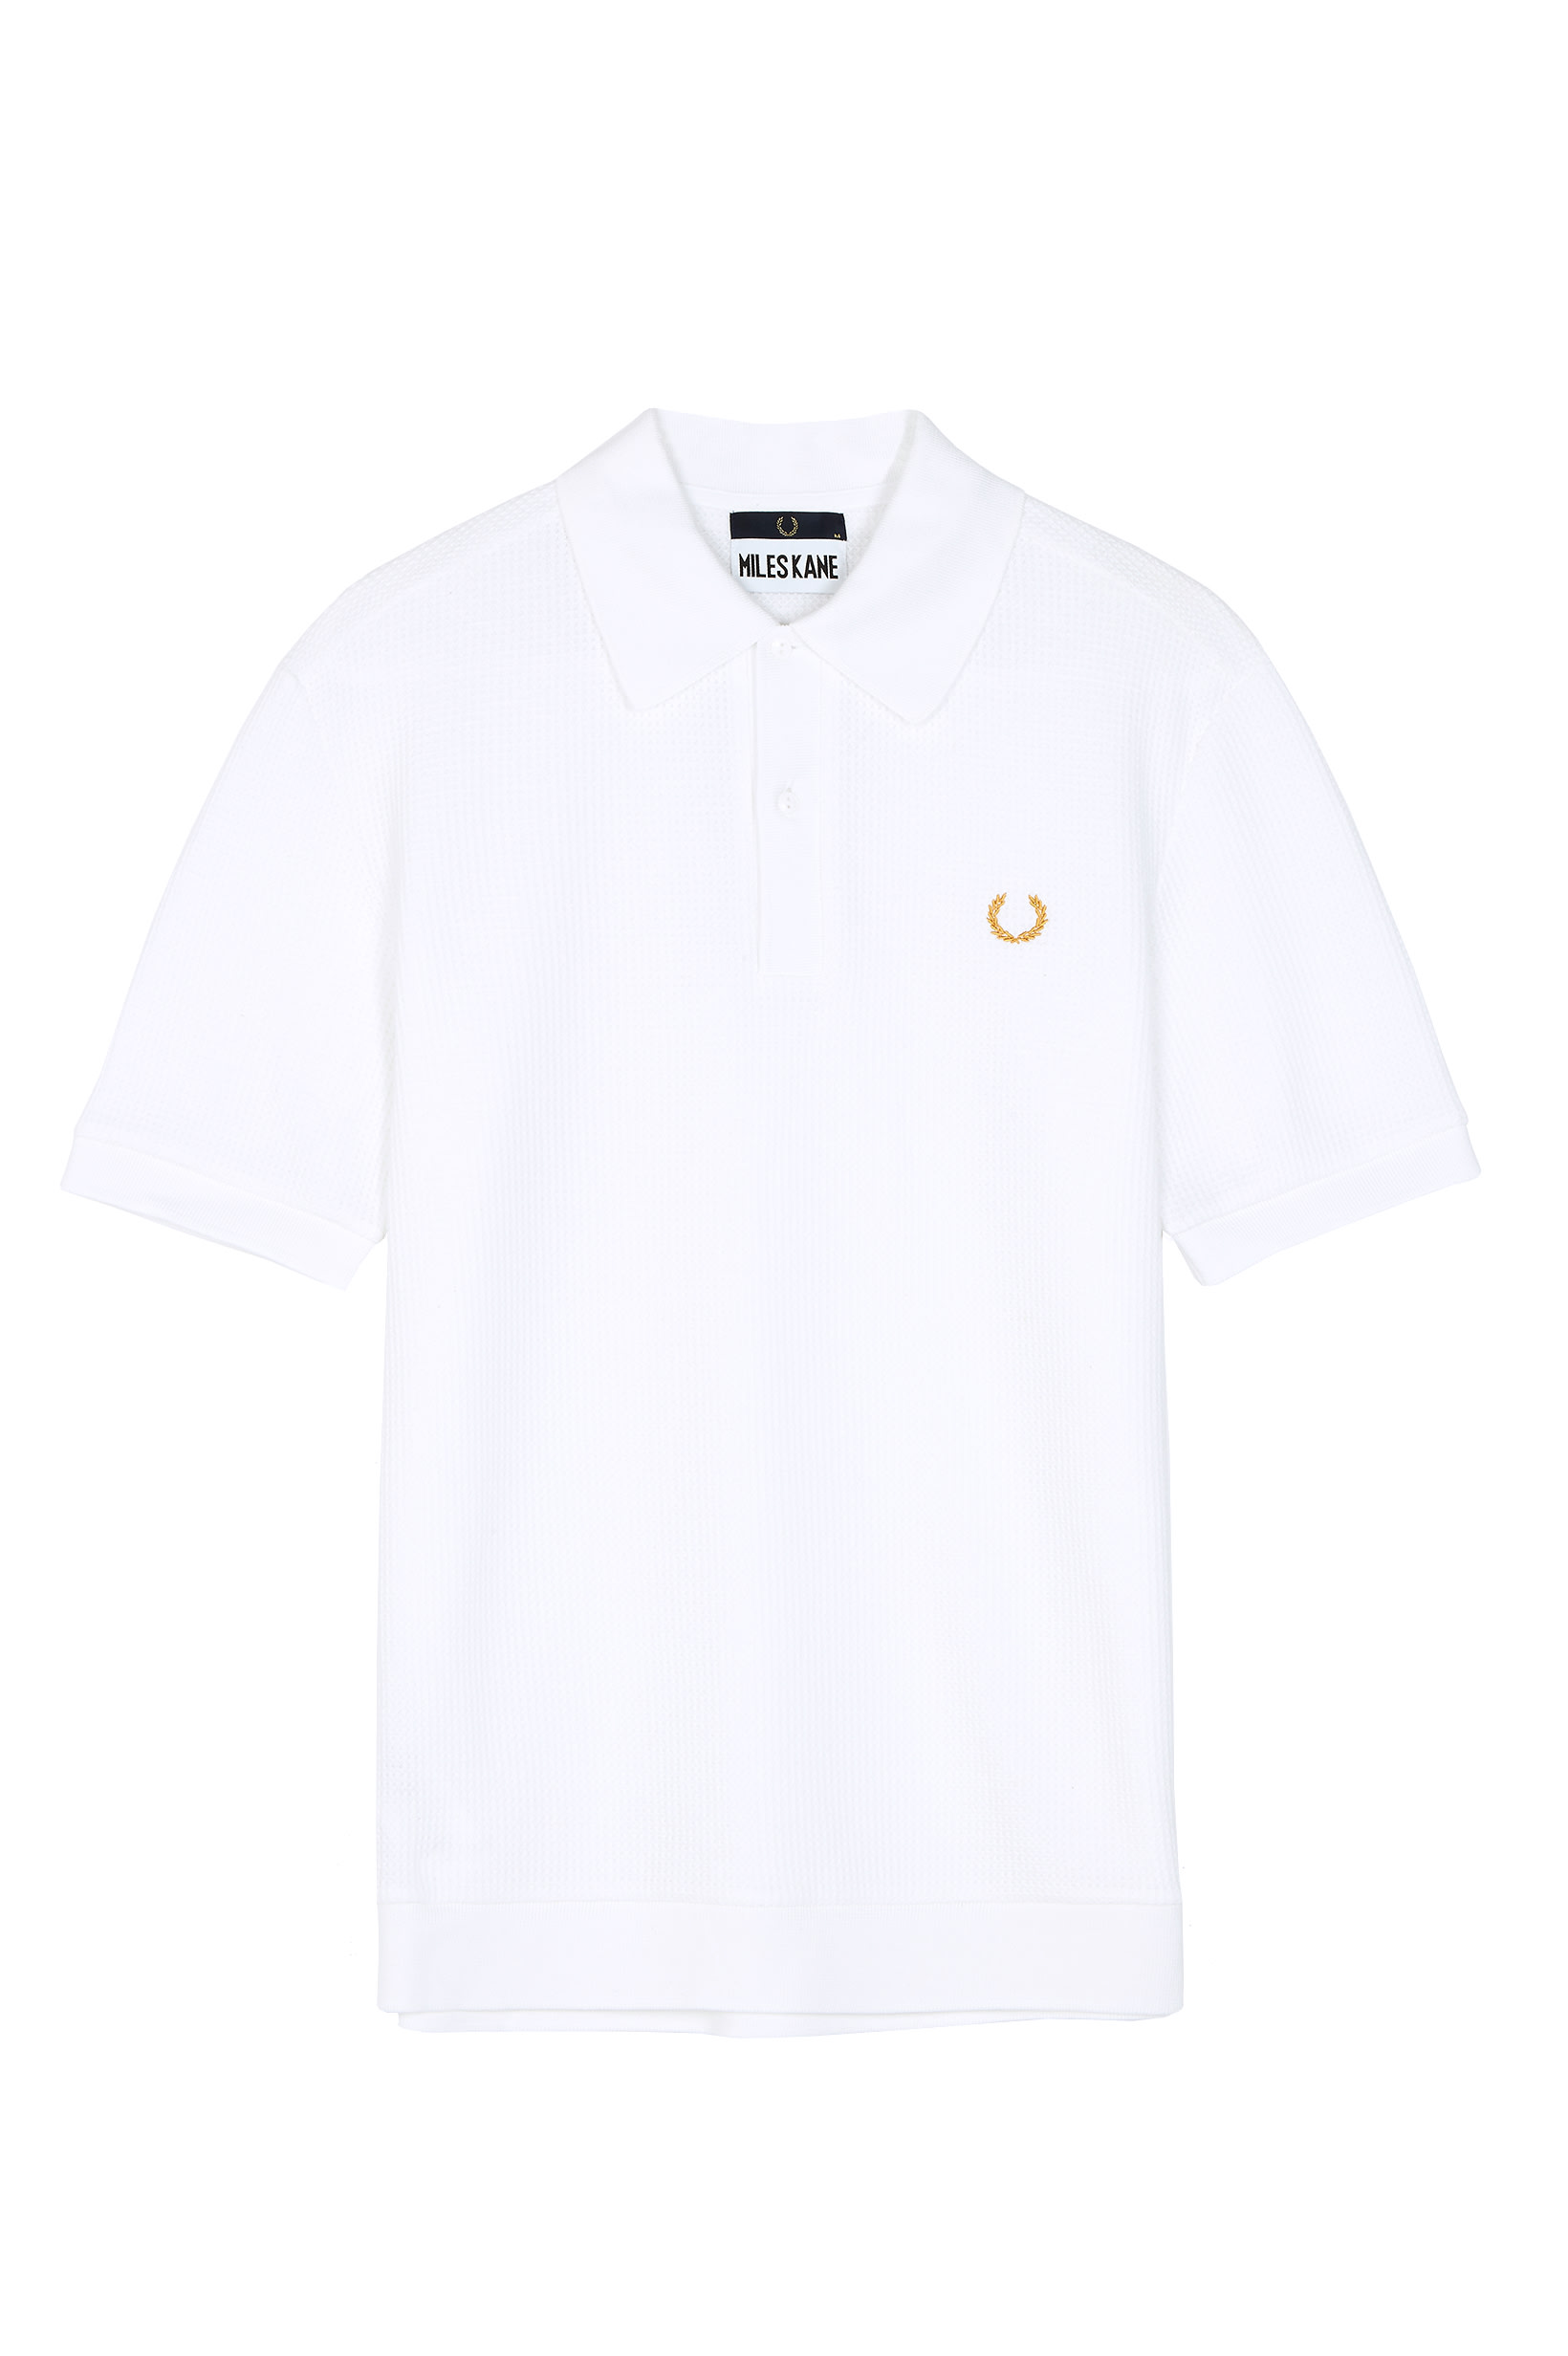 70's Italian Loungewear Sits Centre Stage for Fred Perry and Miles Kane ...